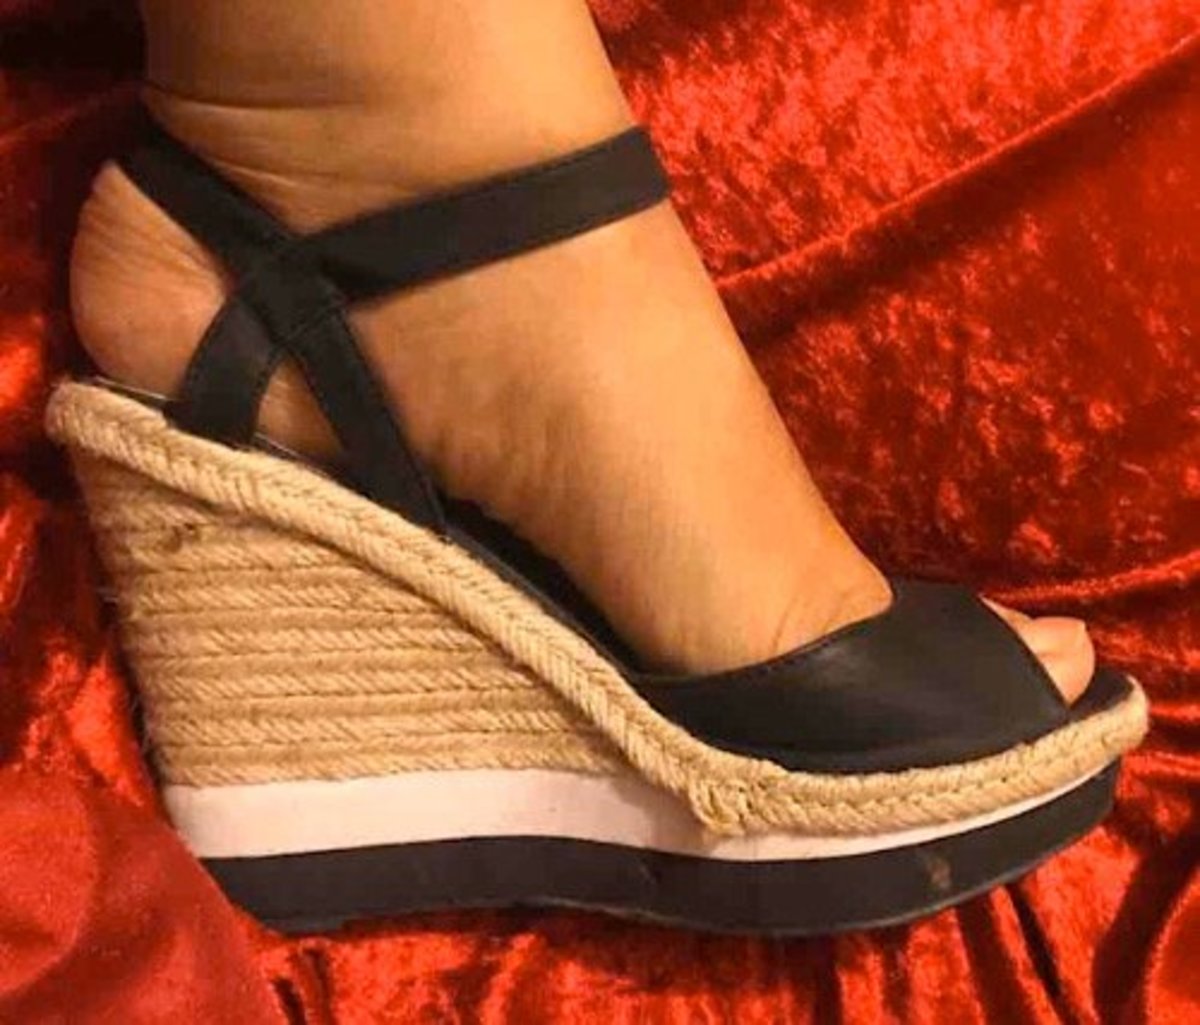 Women’s shoes are often designed to expose and reveal the shape of the foot to advantage.  These wedges are simple in design yet risky for the ankles.